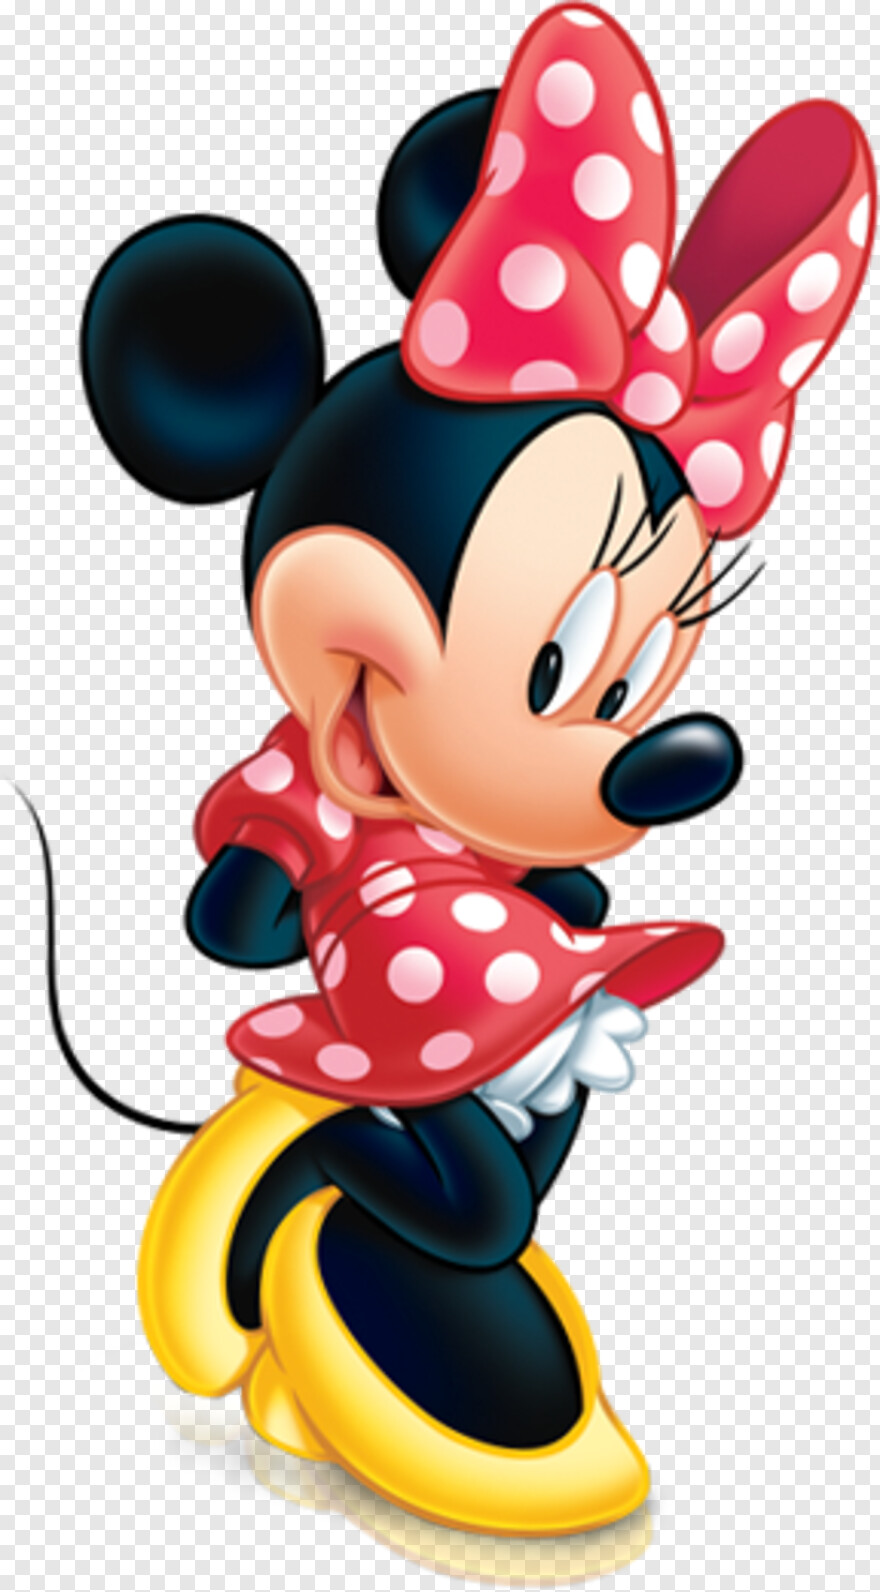 baby-minnie-mouse # 883357